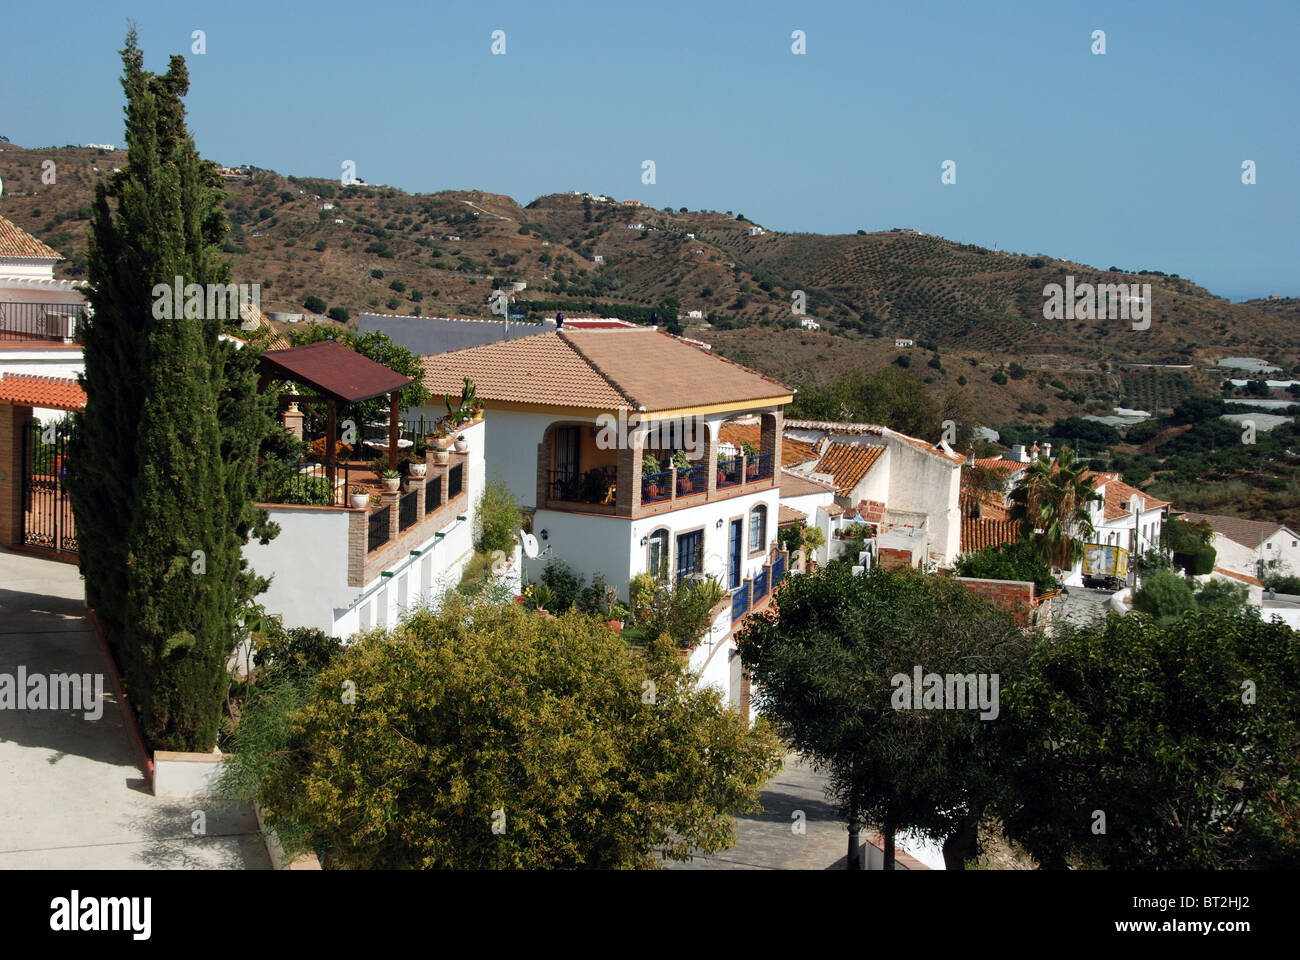 View over village rooftops, whitewashed village (pueblo blanco), Macharaviaya, Costa del Sol, Malaga Province, Andalucia, Spain. Stock Photo